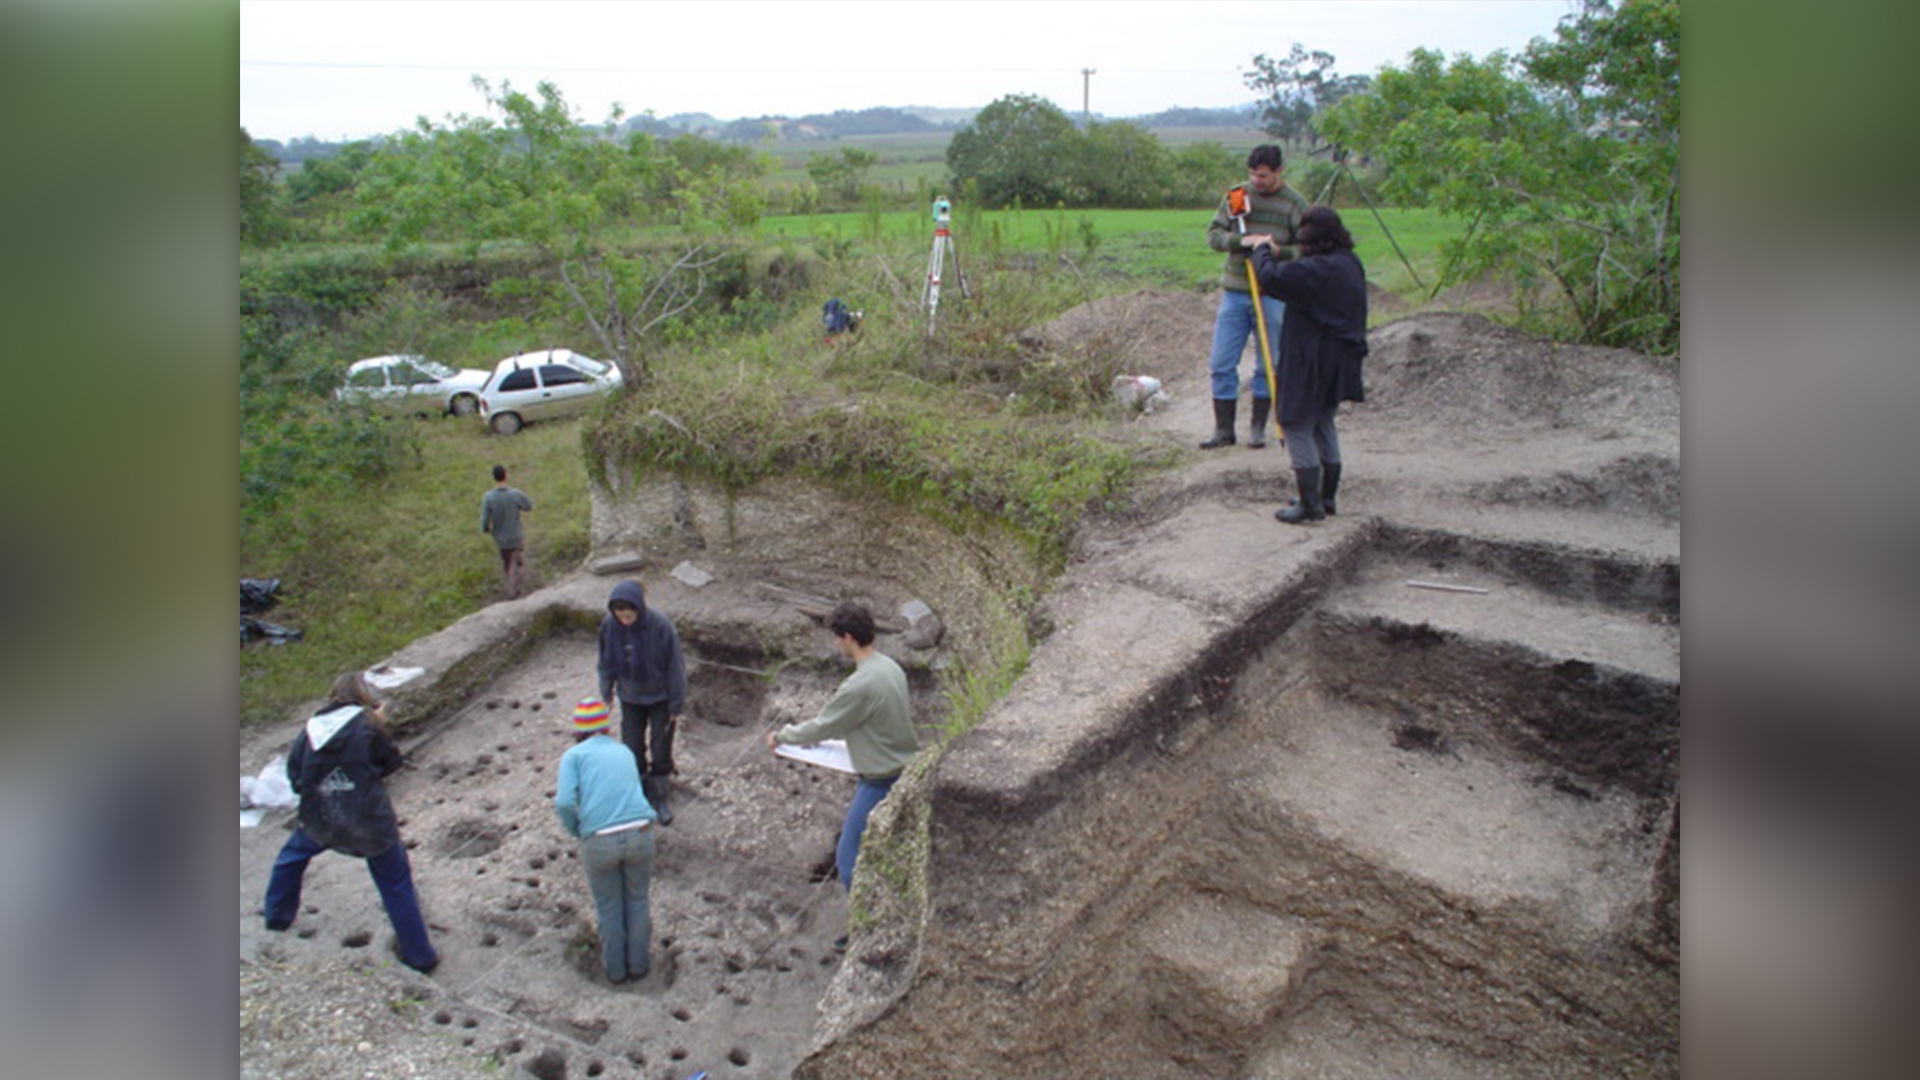 The photo shows seven researchers standing around an archaeological dig site, excavating structures in the ground.  In the background you can see vegetation and two cars.